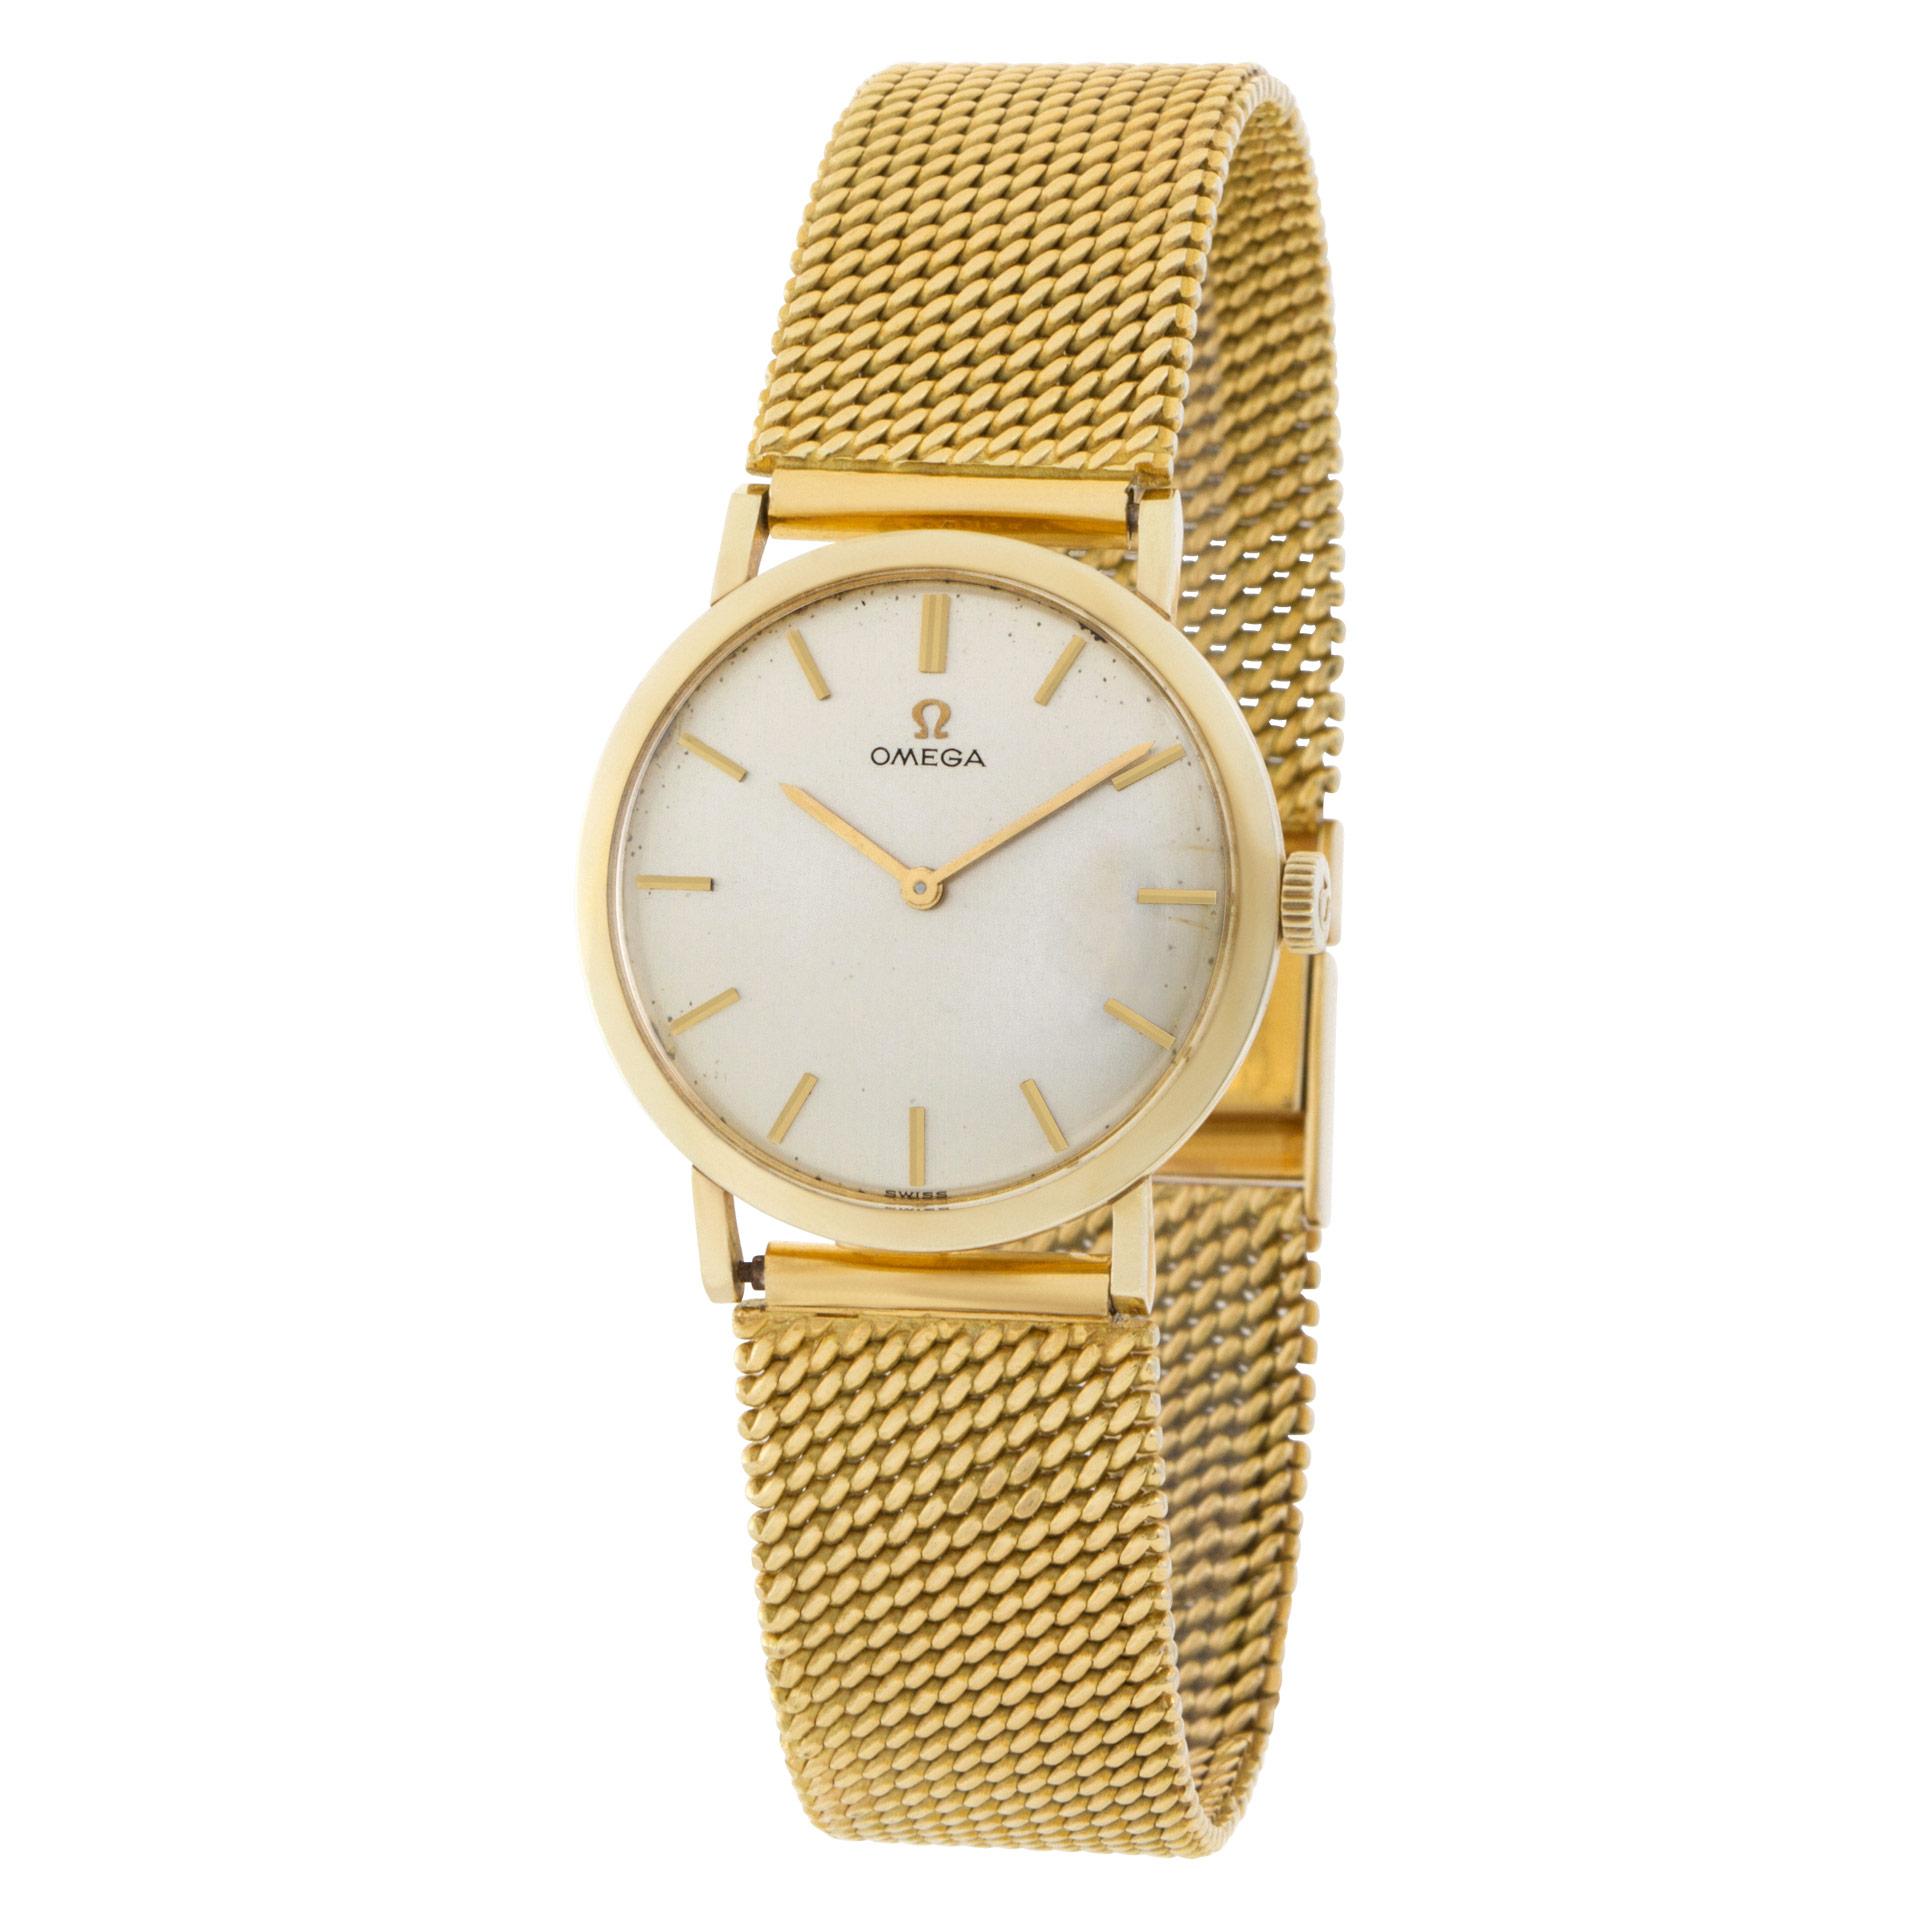 Vintage Omega Classic in 14k on an mesh band in 18k yellow gold. Manual wind with 28.5 mm case size. Ref D6649. Mesh bracelet fit for a 7.5'' wrist. Circa 1970s.
 Fine Pre-owned Omega Watch.   Certified preowned Classic Omega Classic D6649 watch is